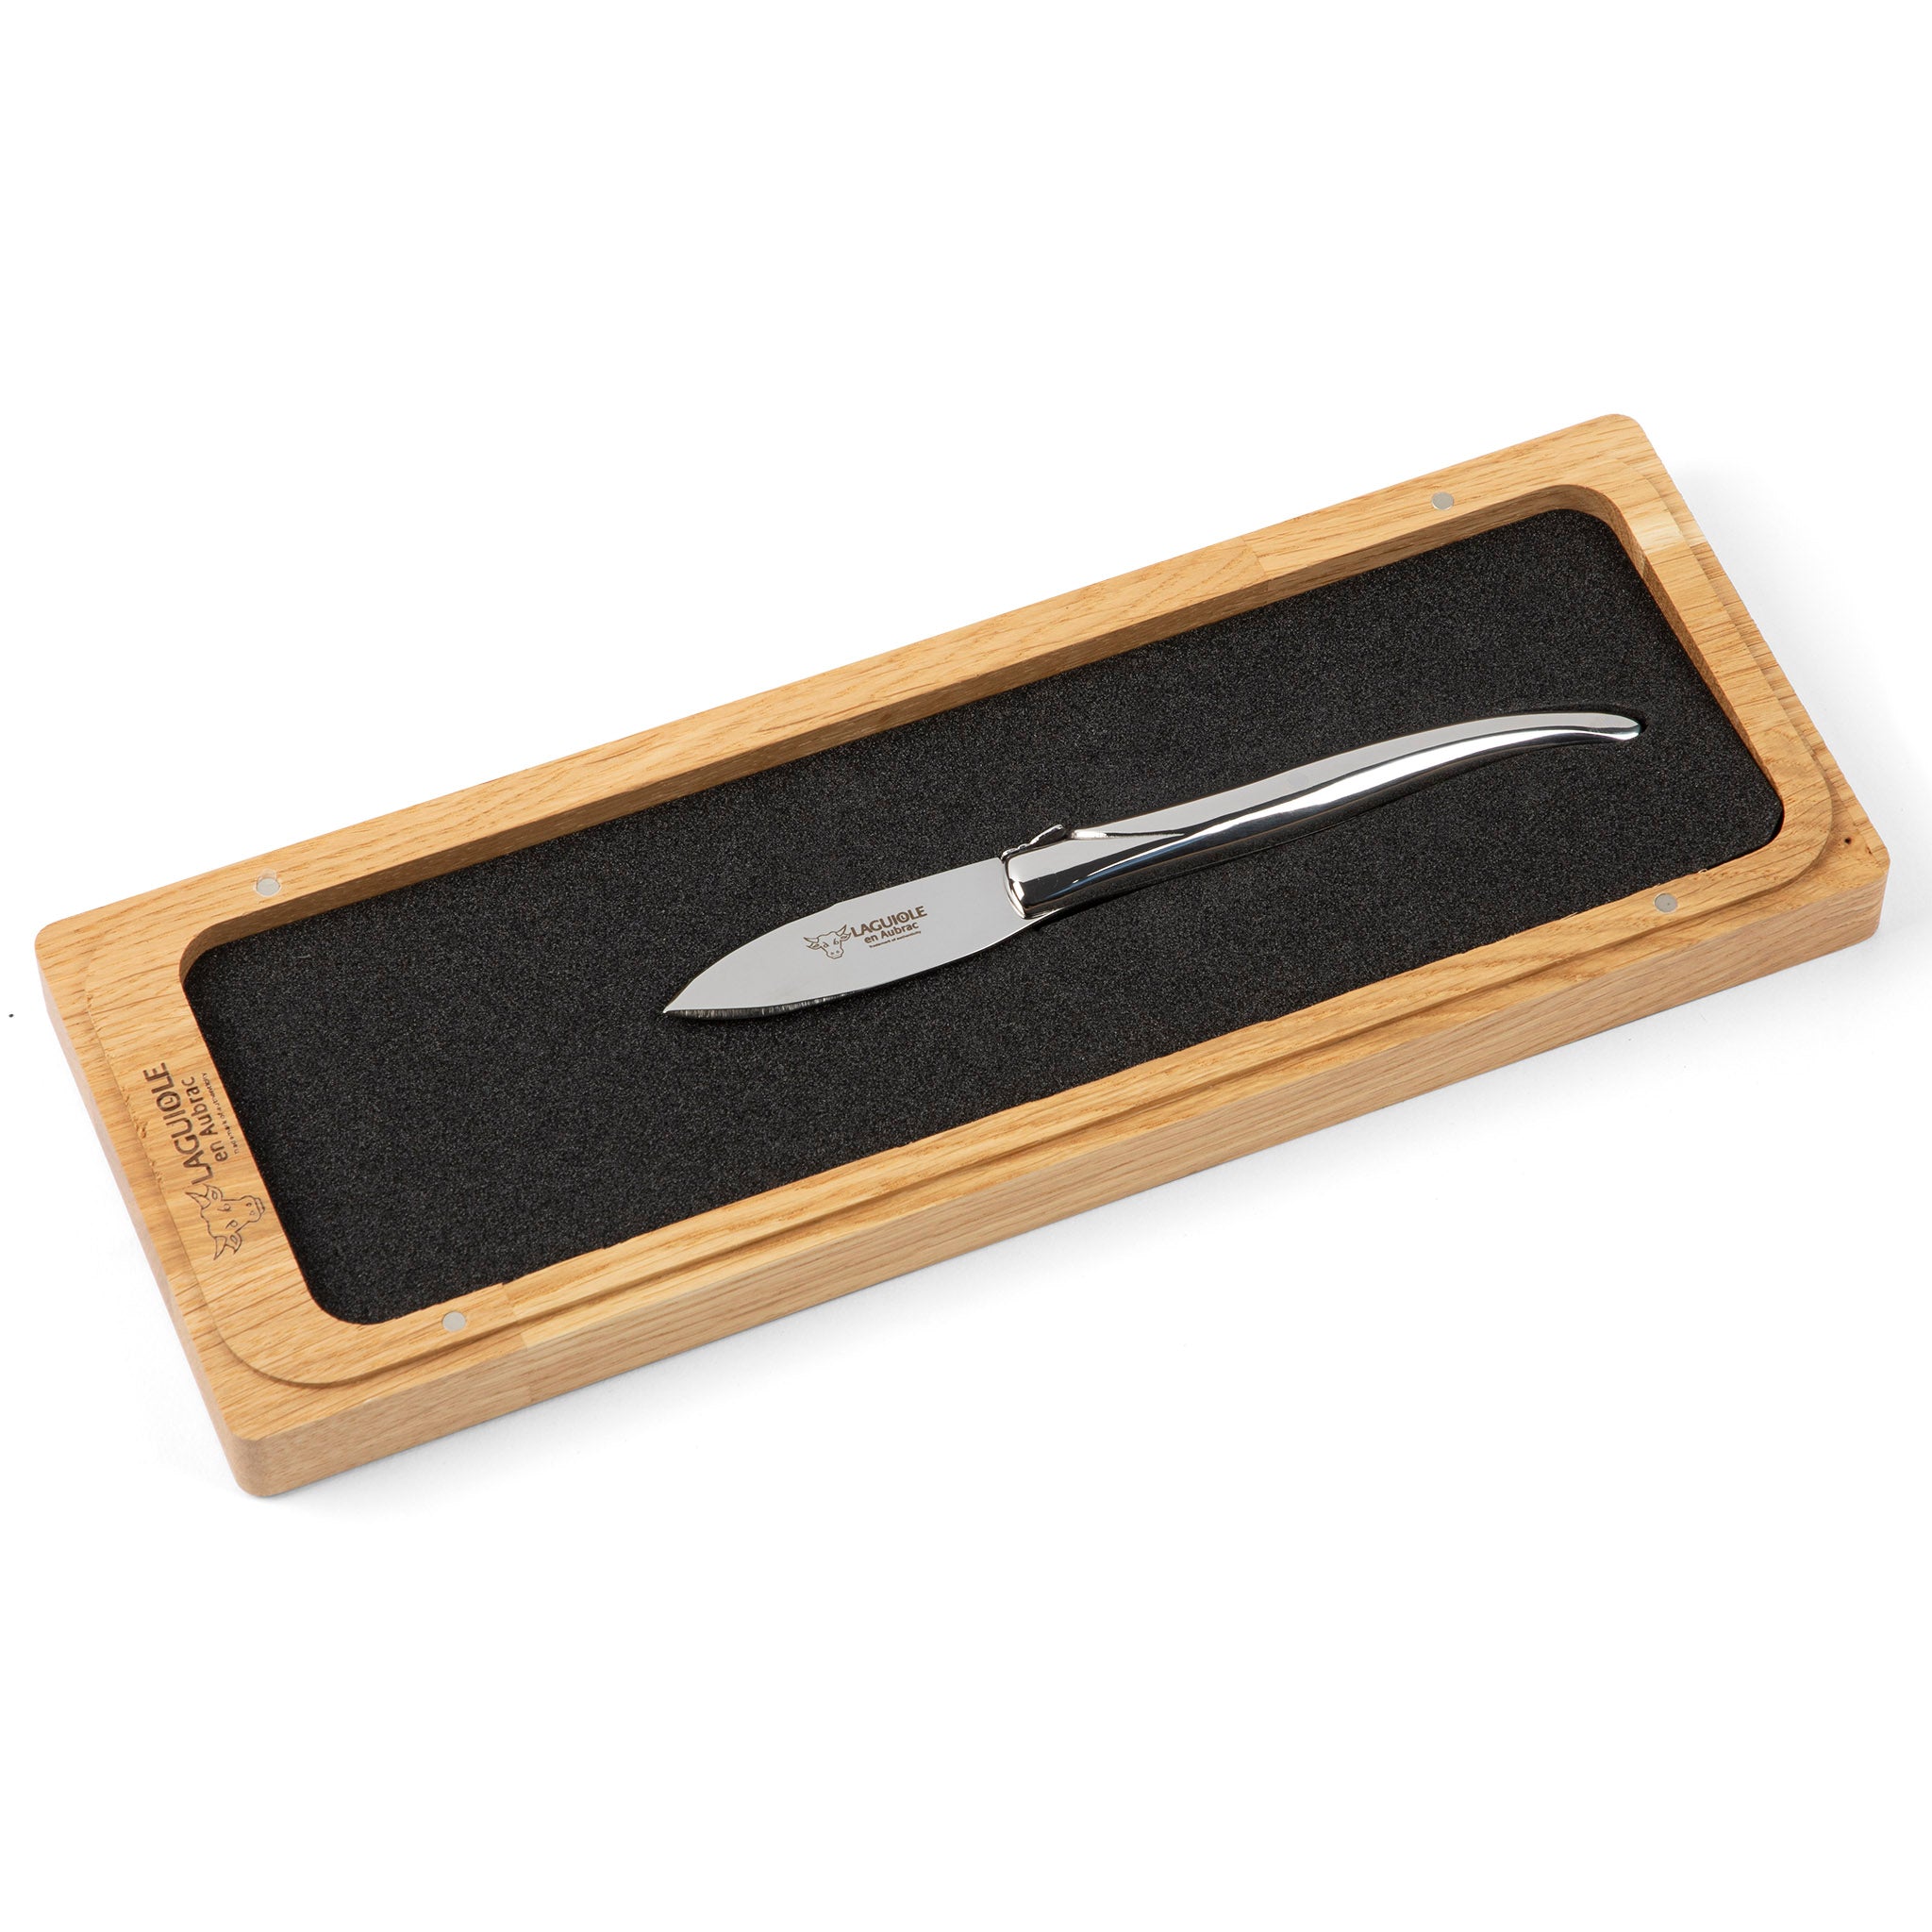 Laguoile Stainless Steel Oyster Knife